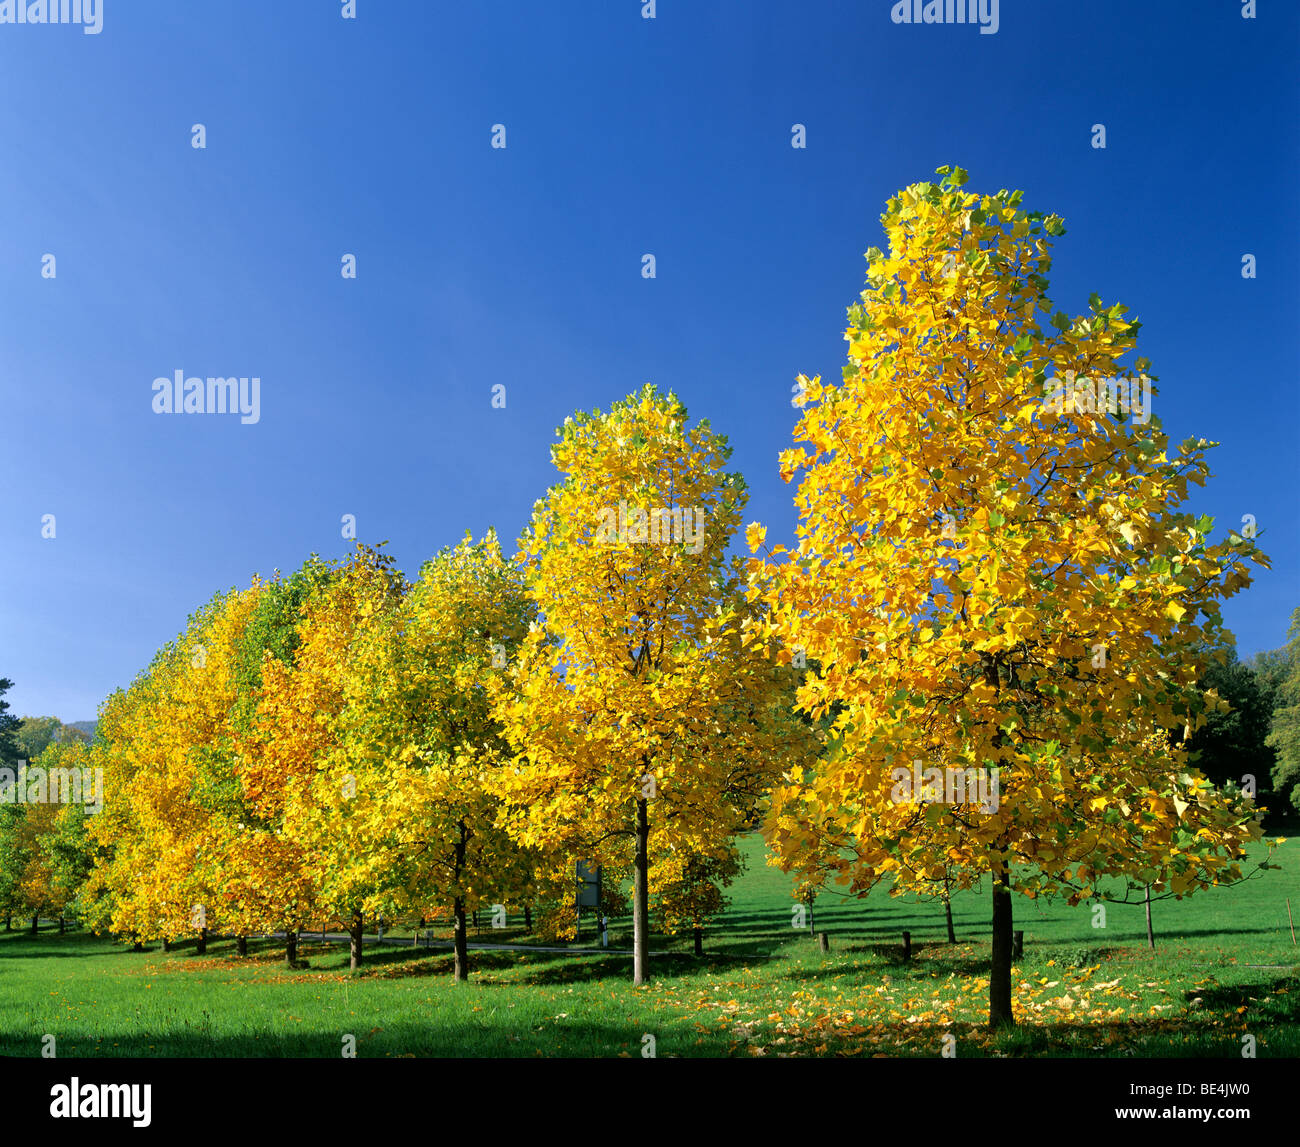 Young Maple trees (Acer) in autumn, autumnal foliage, Germany, Europe Stock Photo